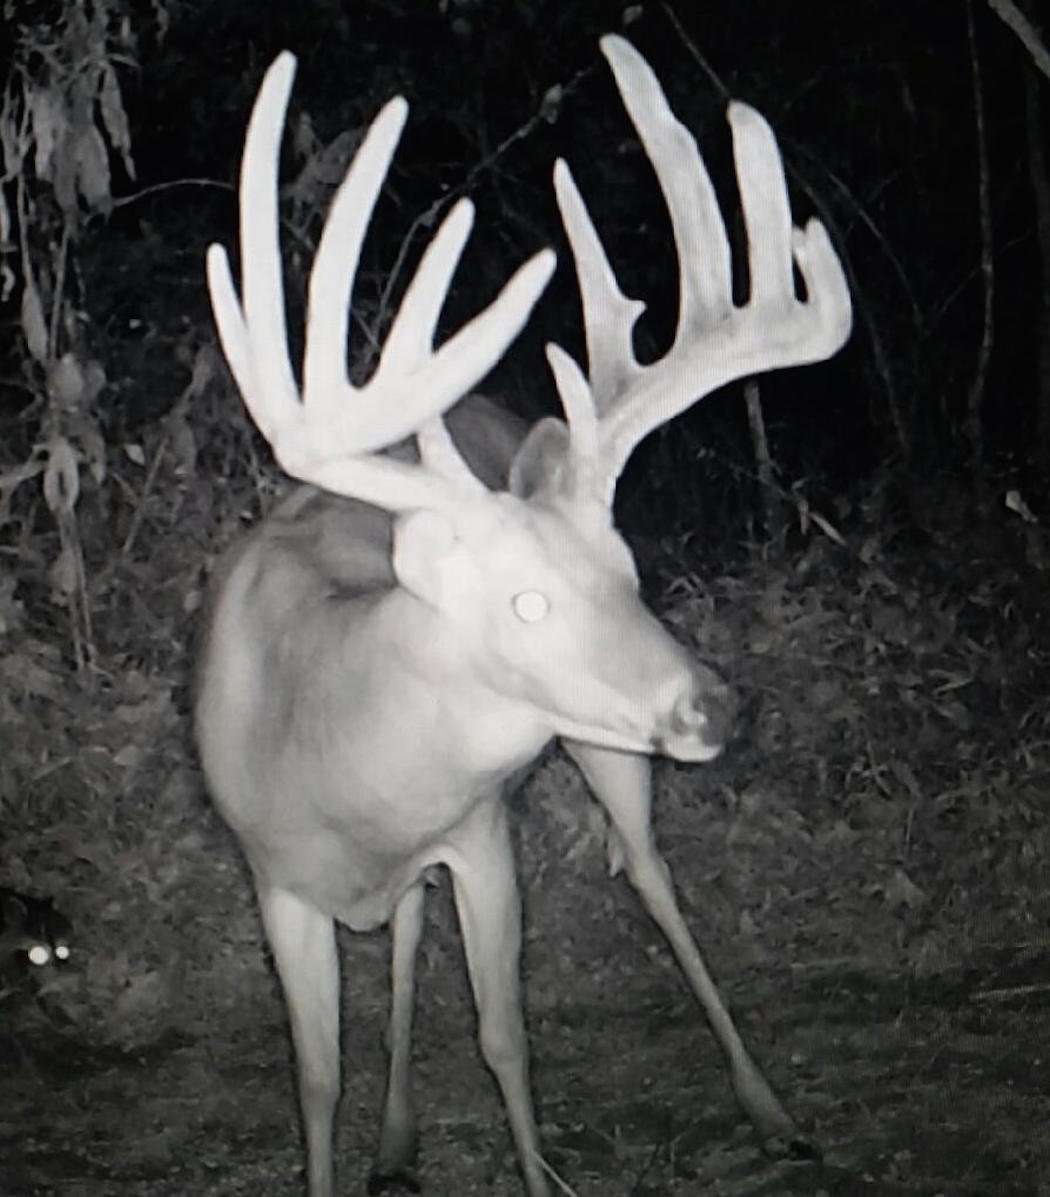 A trail camera photo of the giant deer. (Photo courtesy of Dave Oettel)